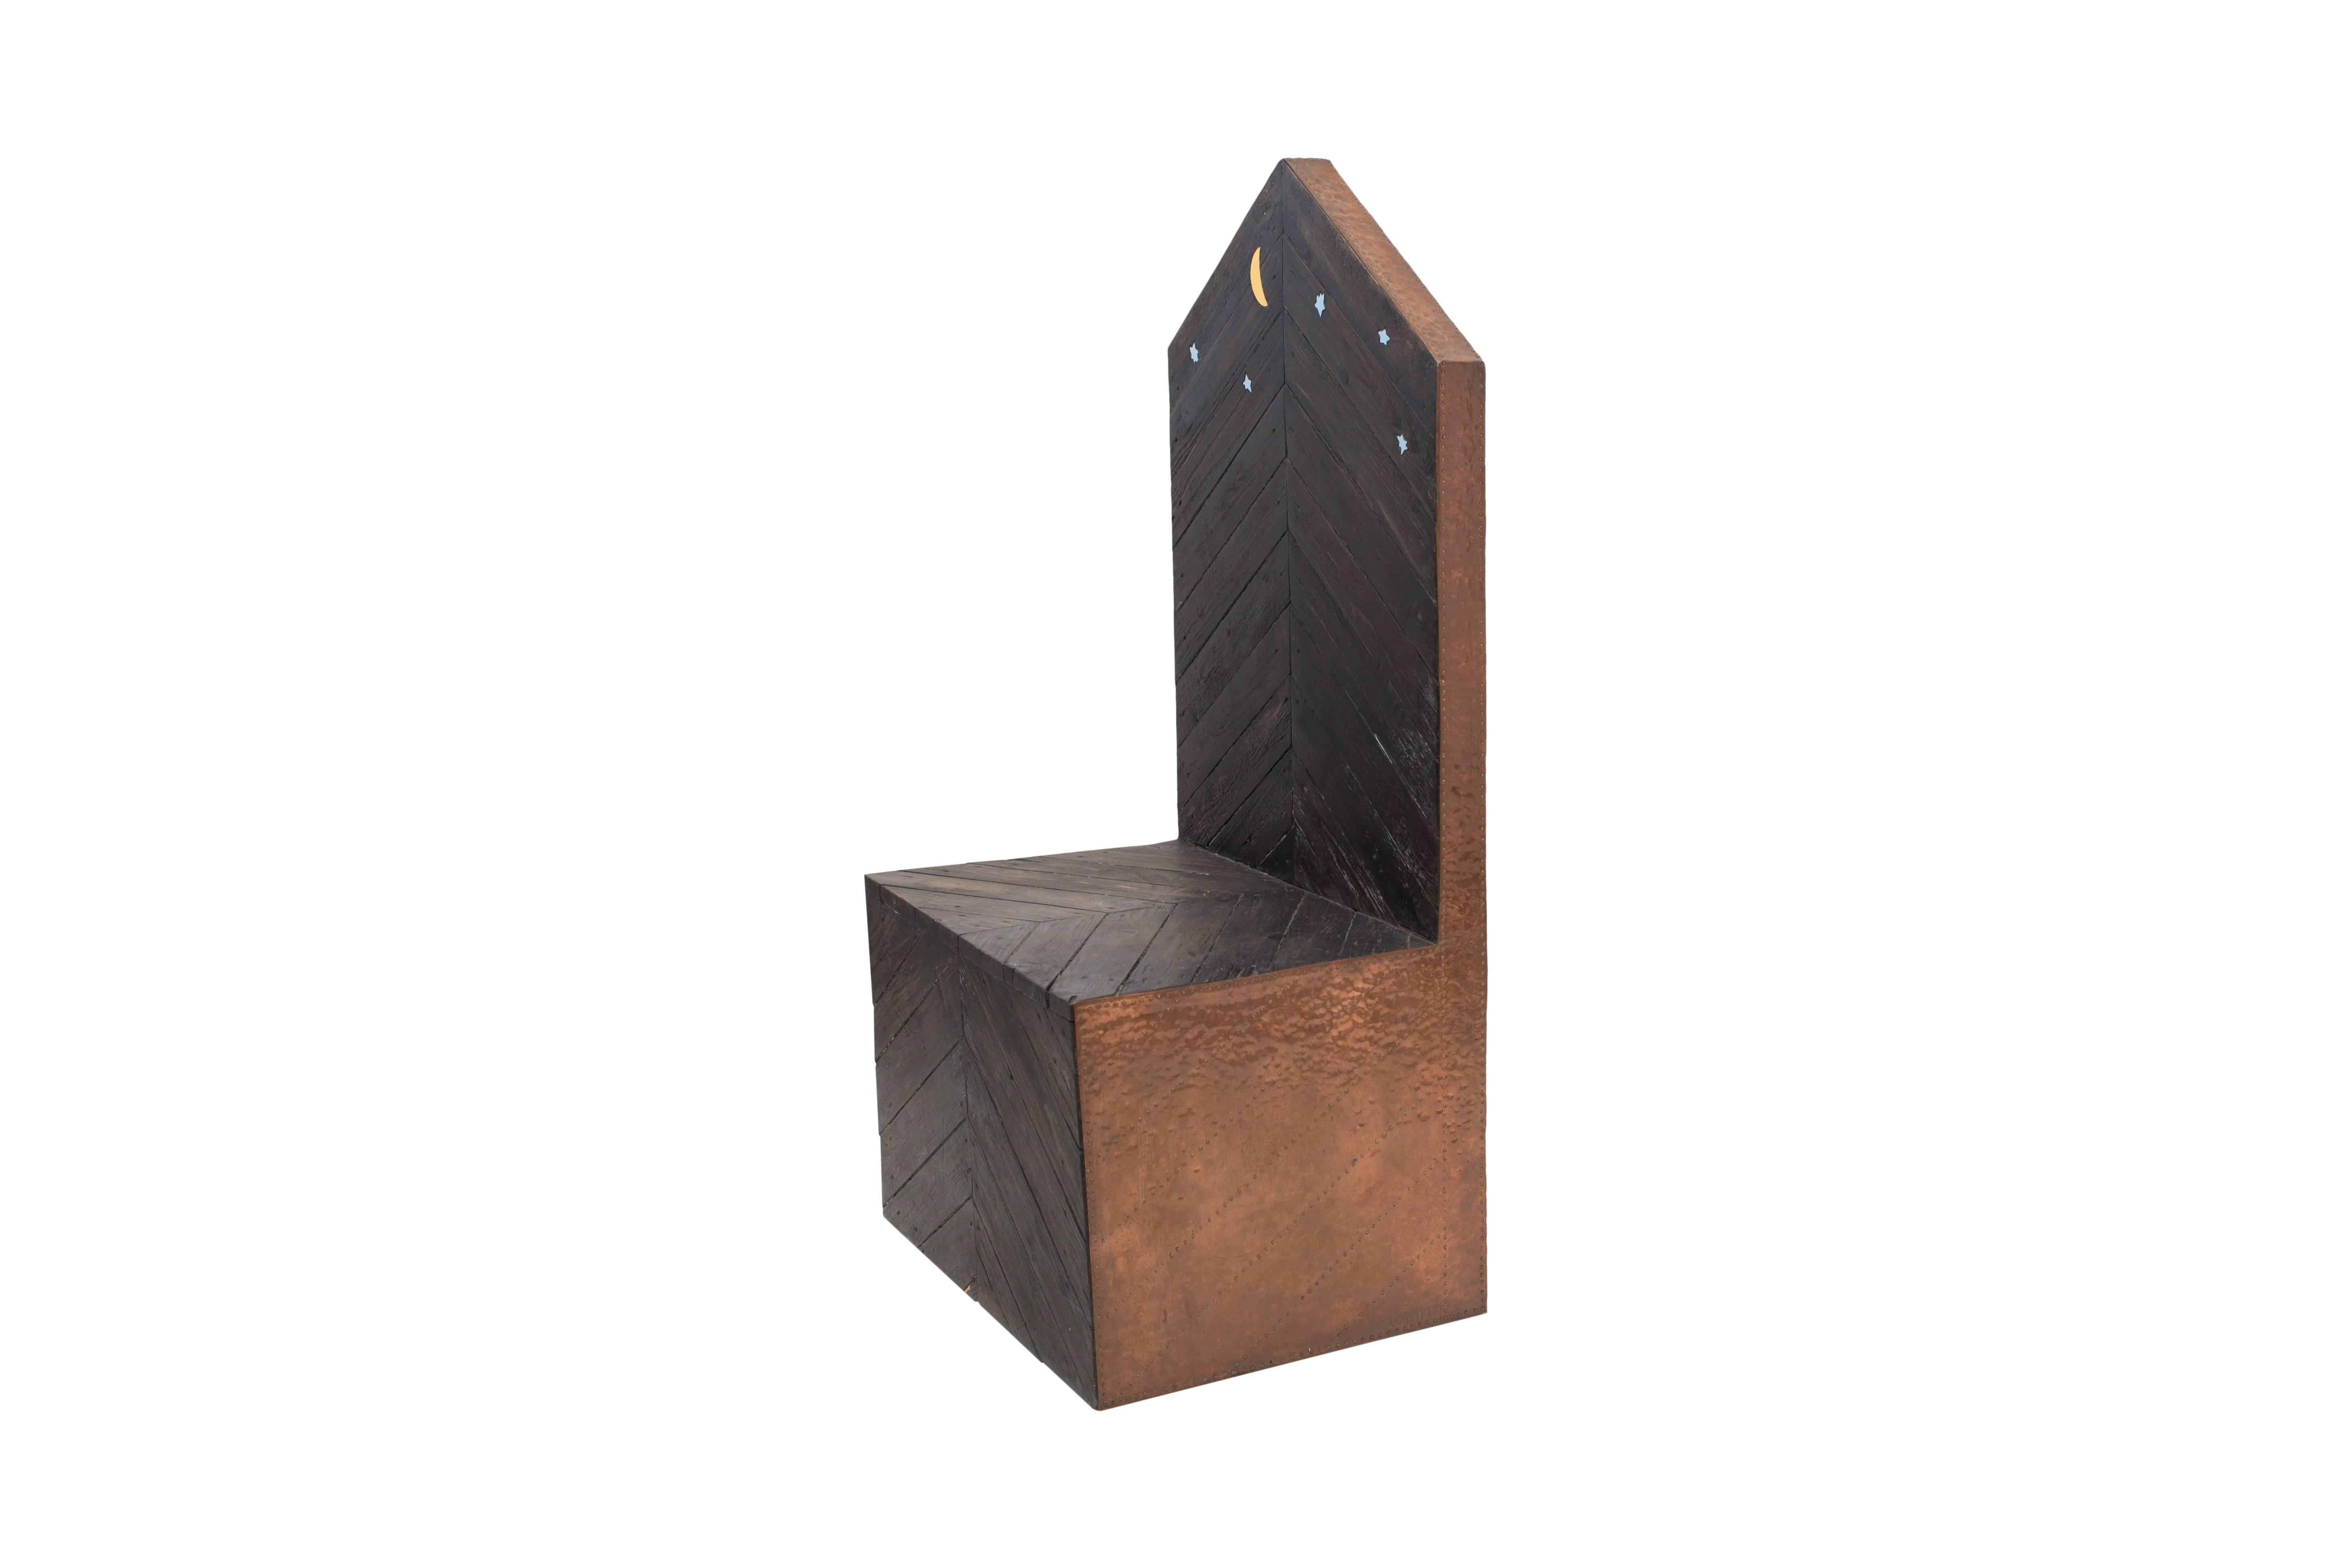 Unusual Throne chair by Italian artist Sandro Lorenzini
Solid wooden panels with ceramic stars and moon inserts.
Copper side panels.

A fantastic piece made in Italy in the early 1980s

Measures: W 68 cm, D 54 cm, H 142 cm.